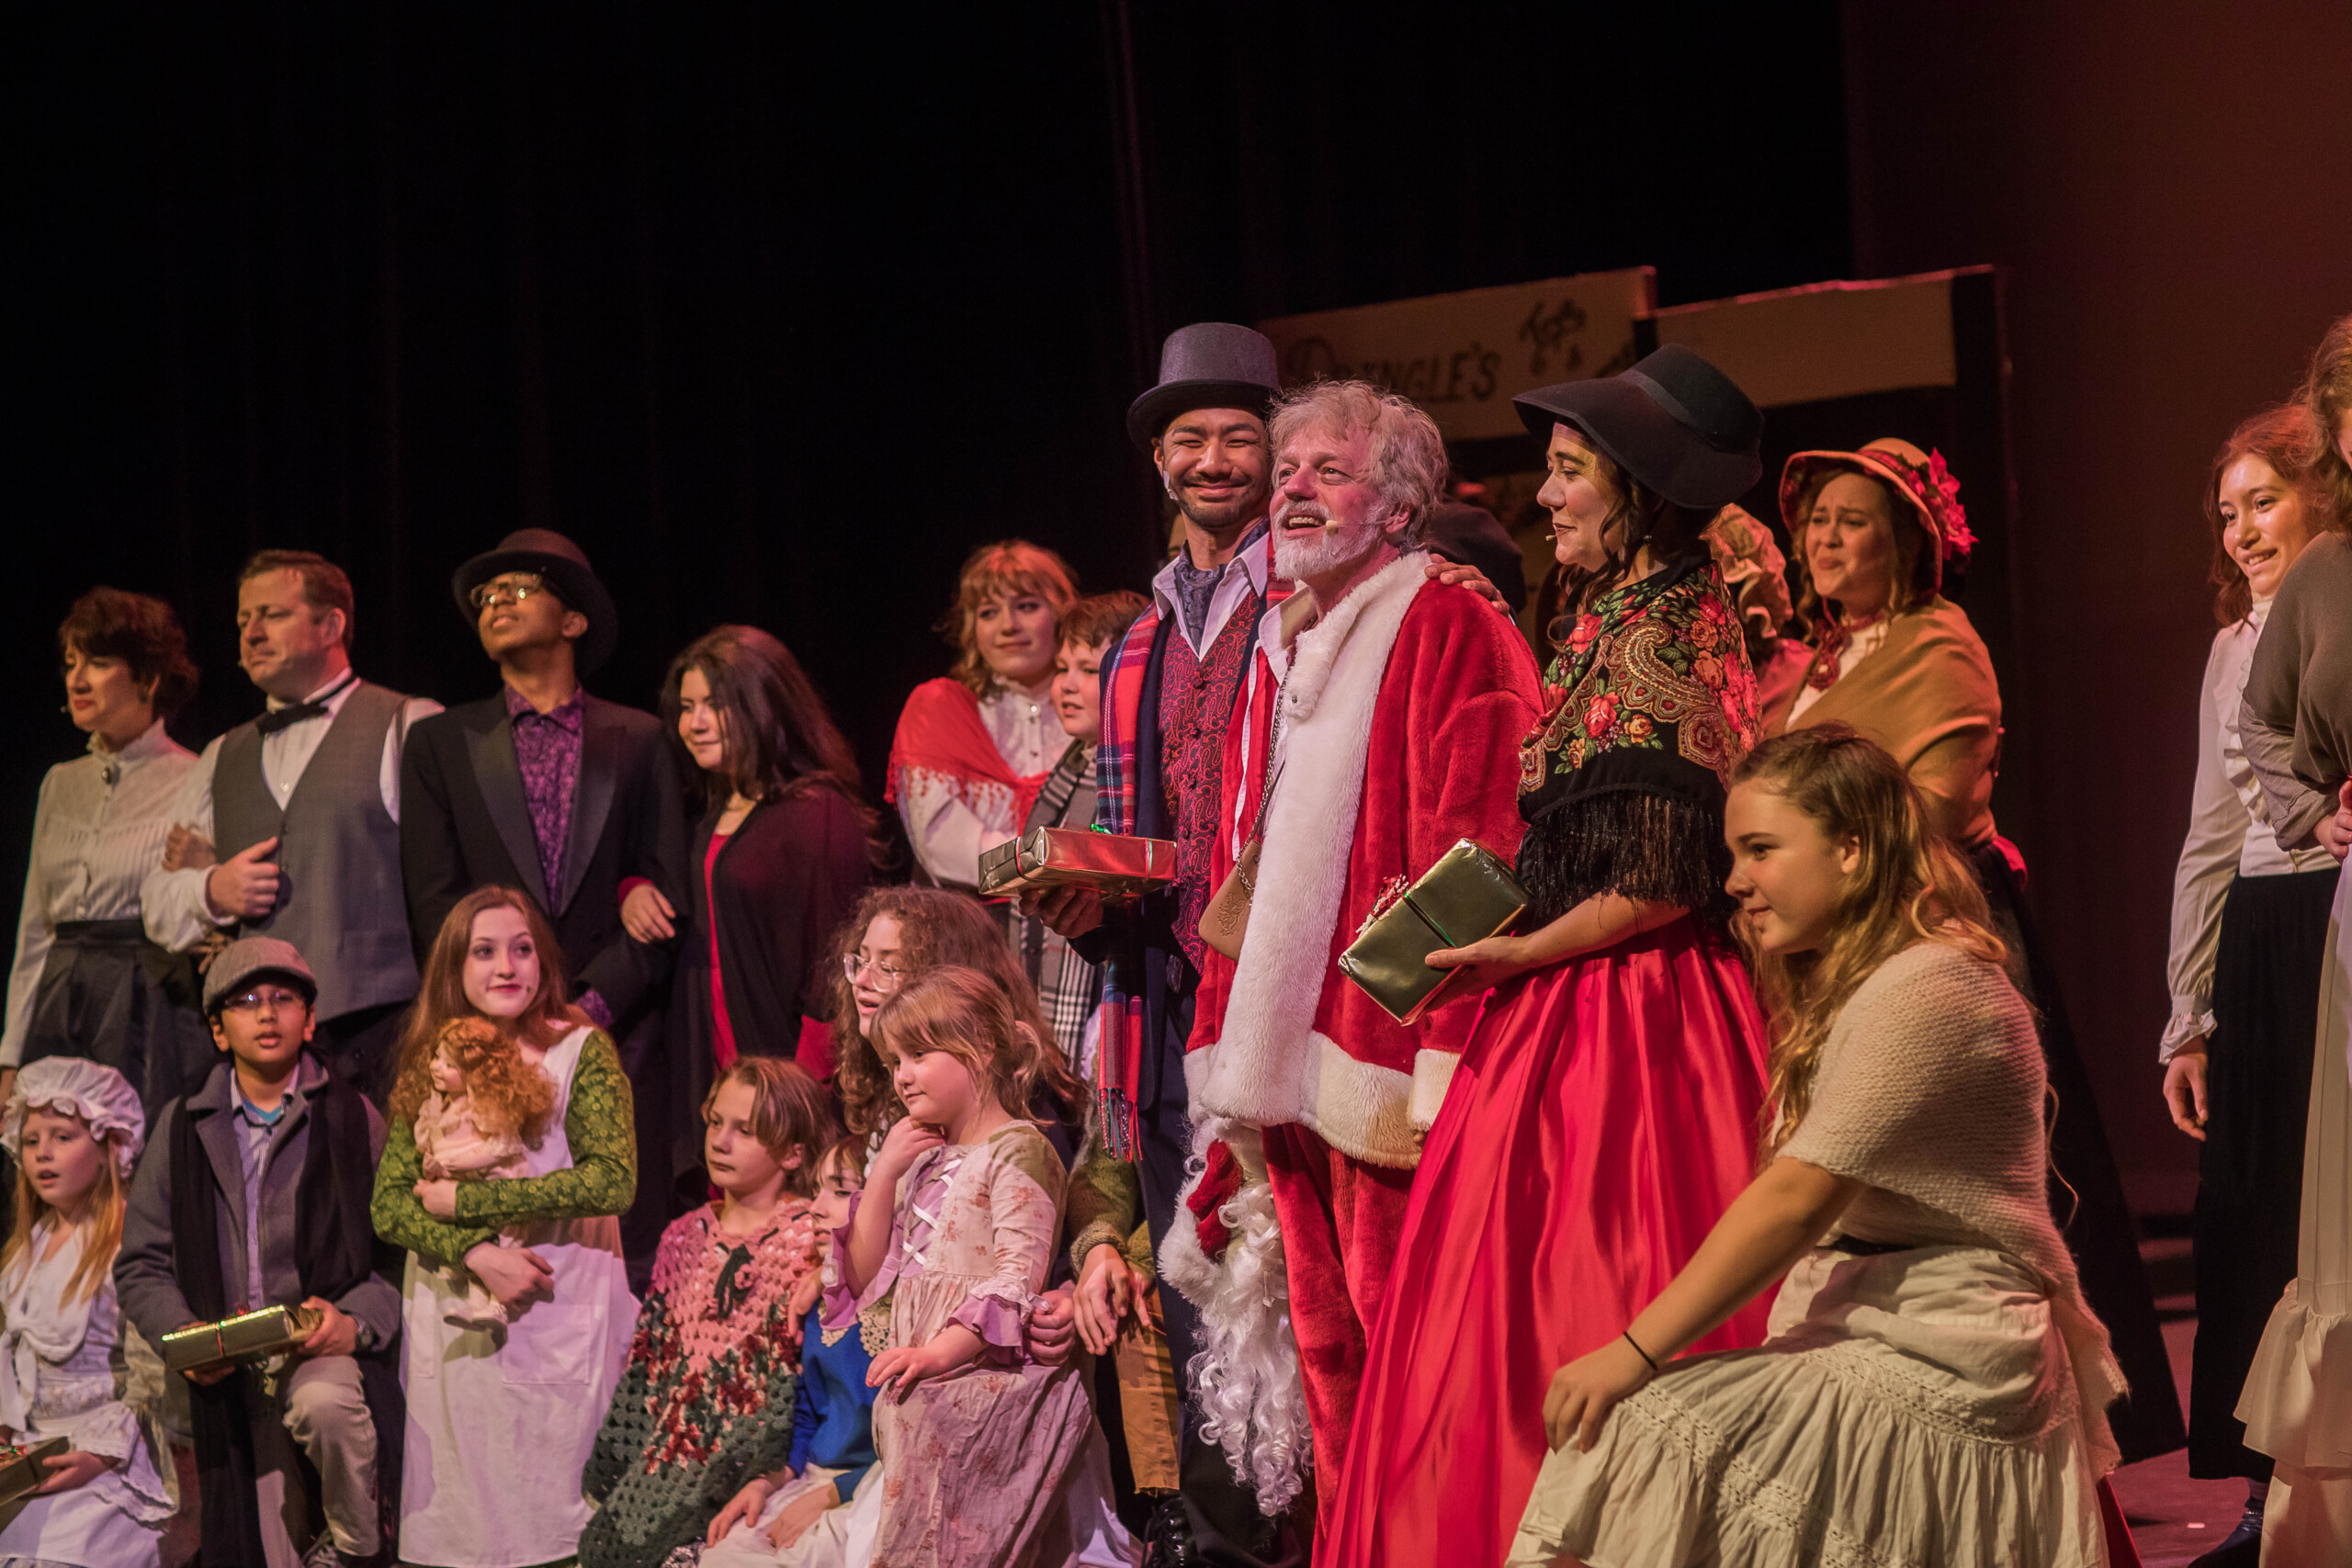 Darrell Rodenbaugh as Scrooge and the cast of Scrooge! the Musical performing the finale